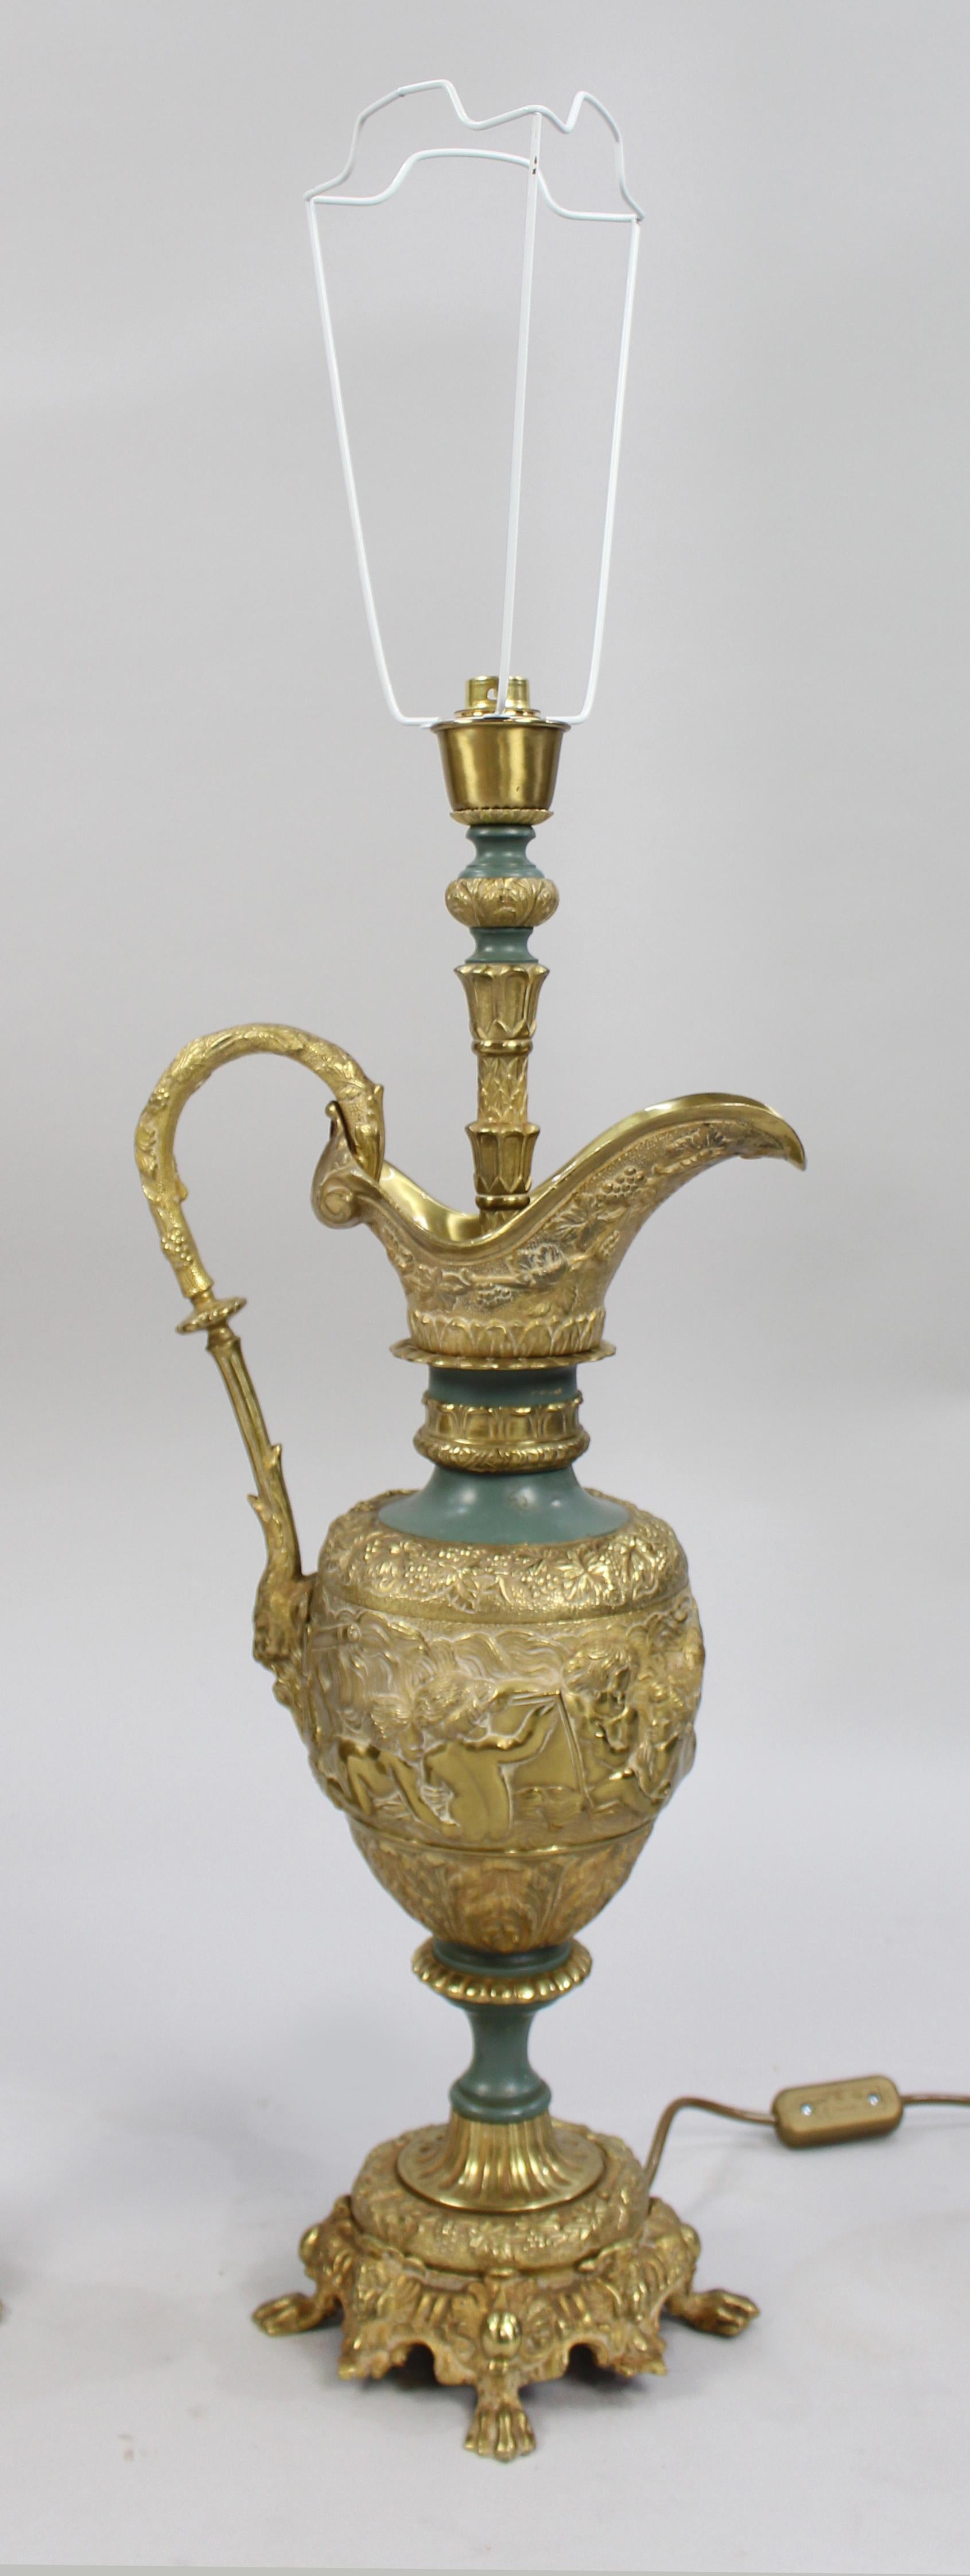 19th Century Pair of Antique Ormolu Ewer Form Table Lamps For Sale